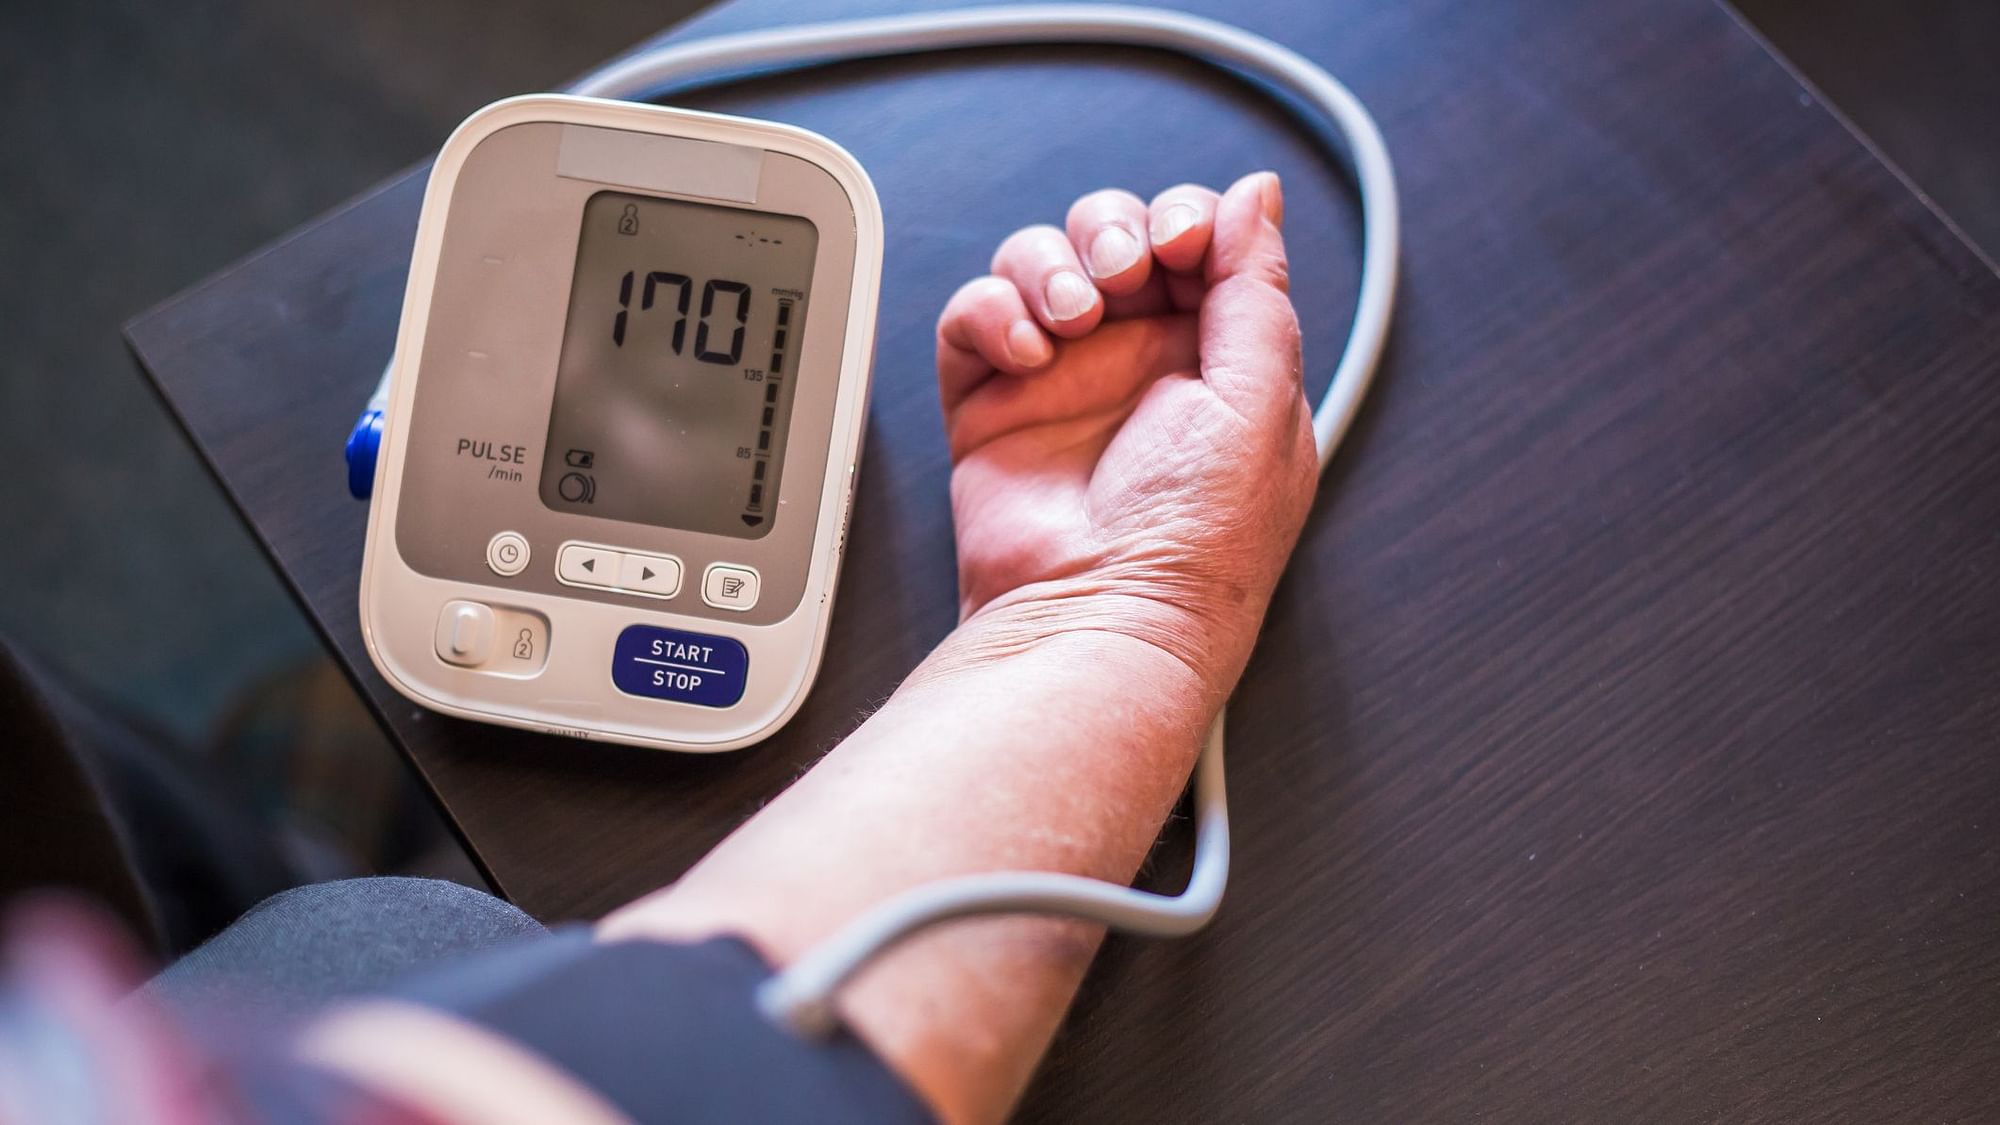 Researchers have found that low blood pressure is linked to high mortality in older adults.